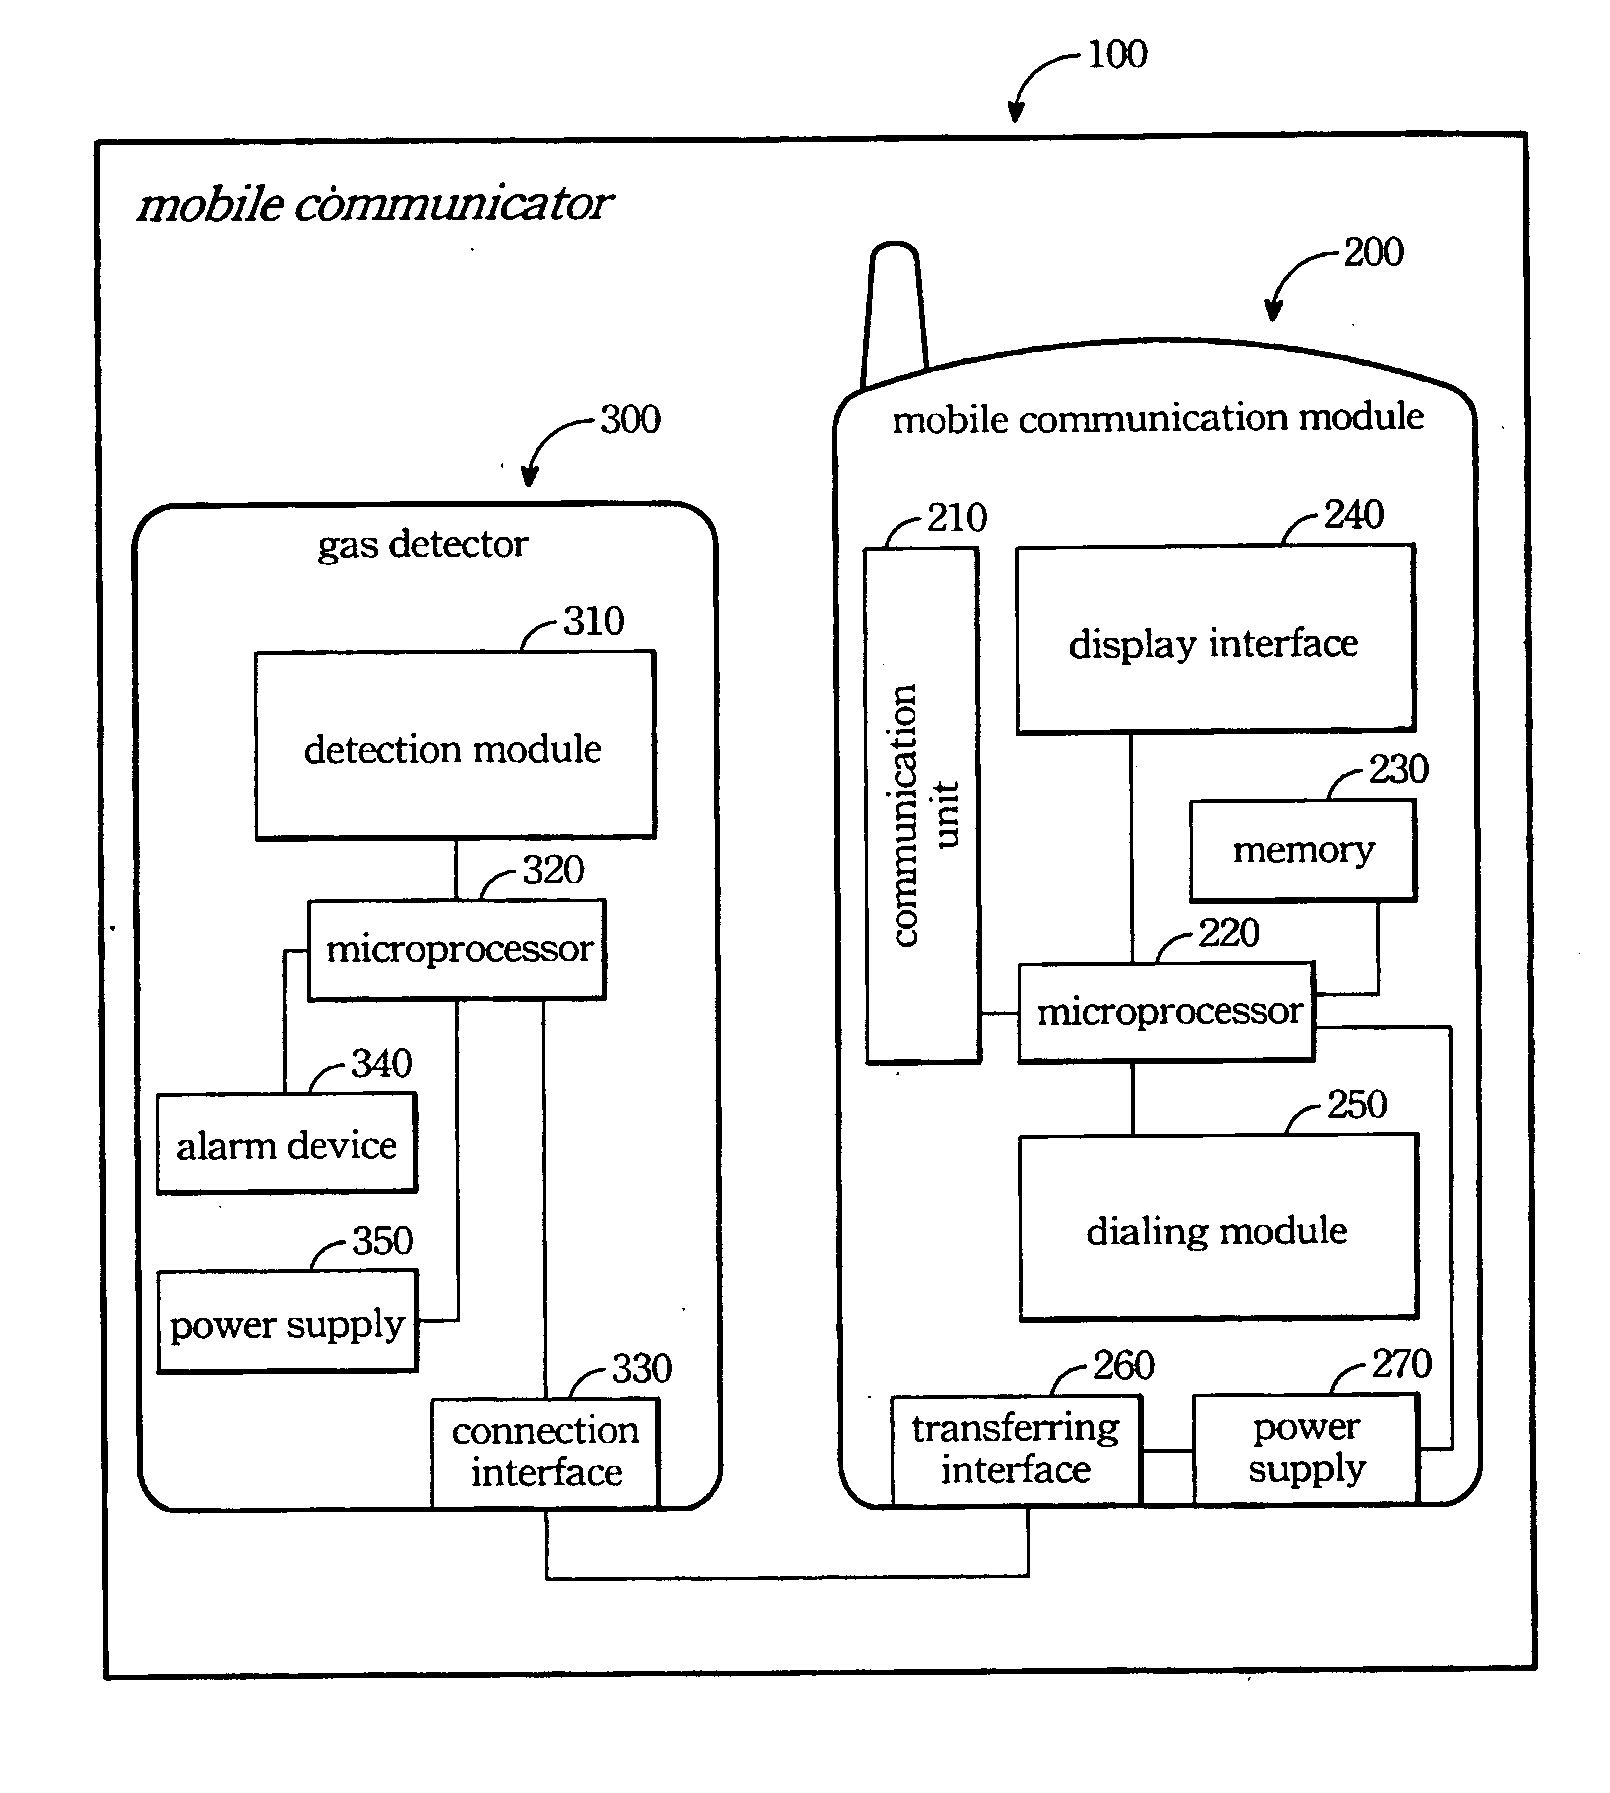 Mobile communication device with gas detecting function